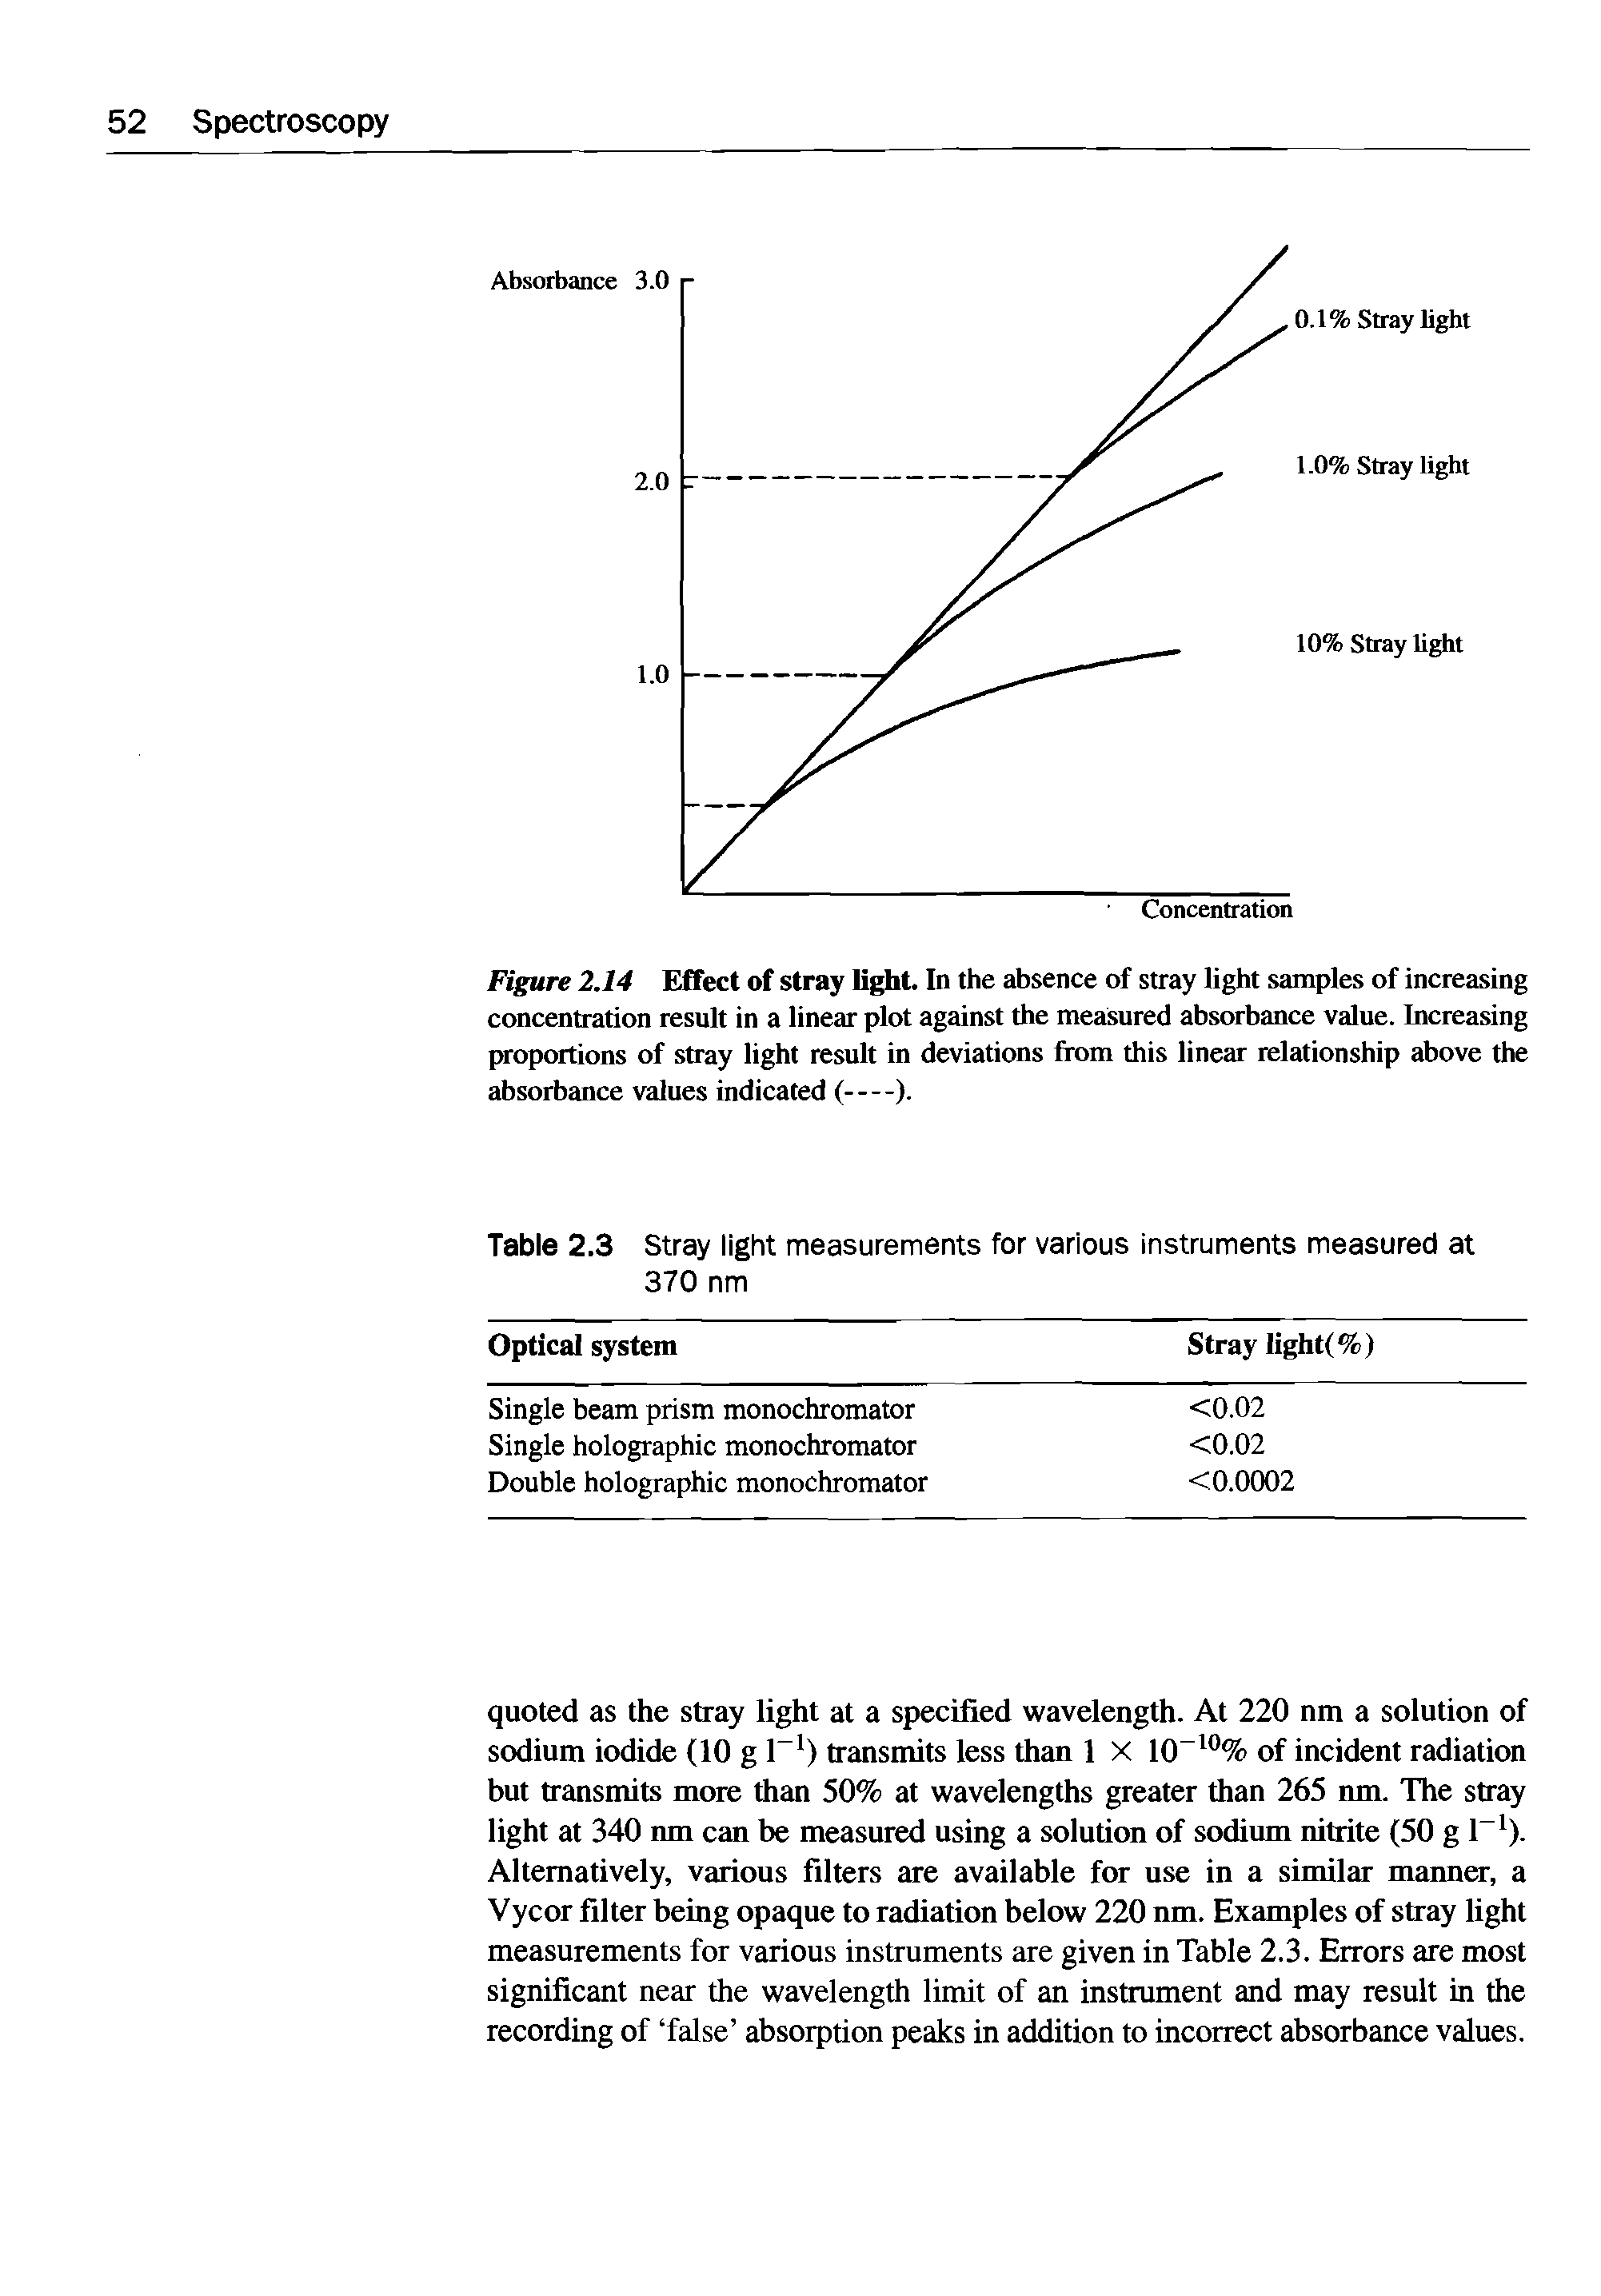 Figure 2.14 Effect of stray light. In the absence of stray light samples of increasing concentration result in a linear plot against the measured absorbance value. Increasing proportions of stray light result in deviations from this linear relationship above the absorbance values indicated (---).